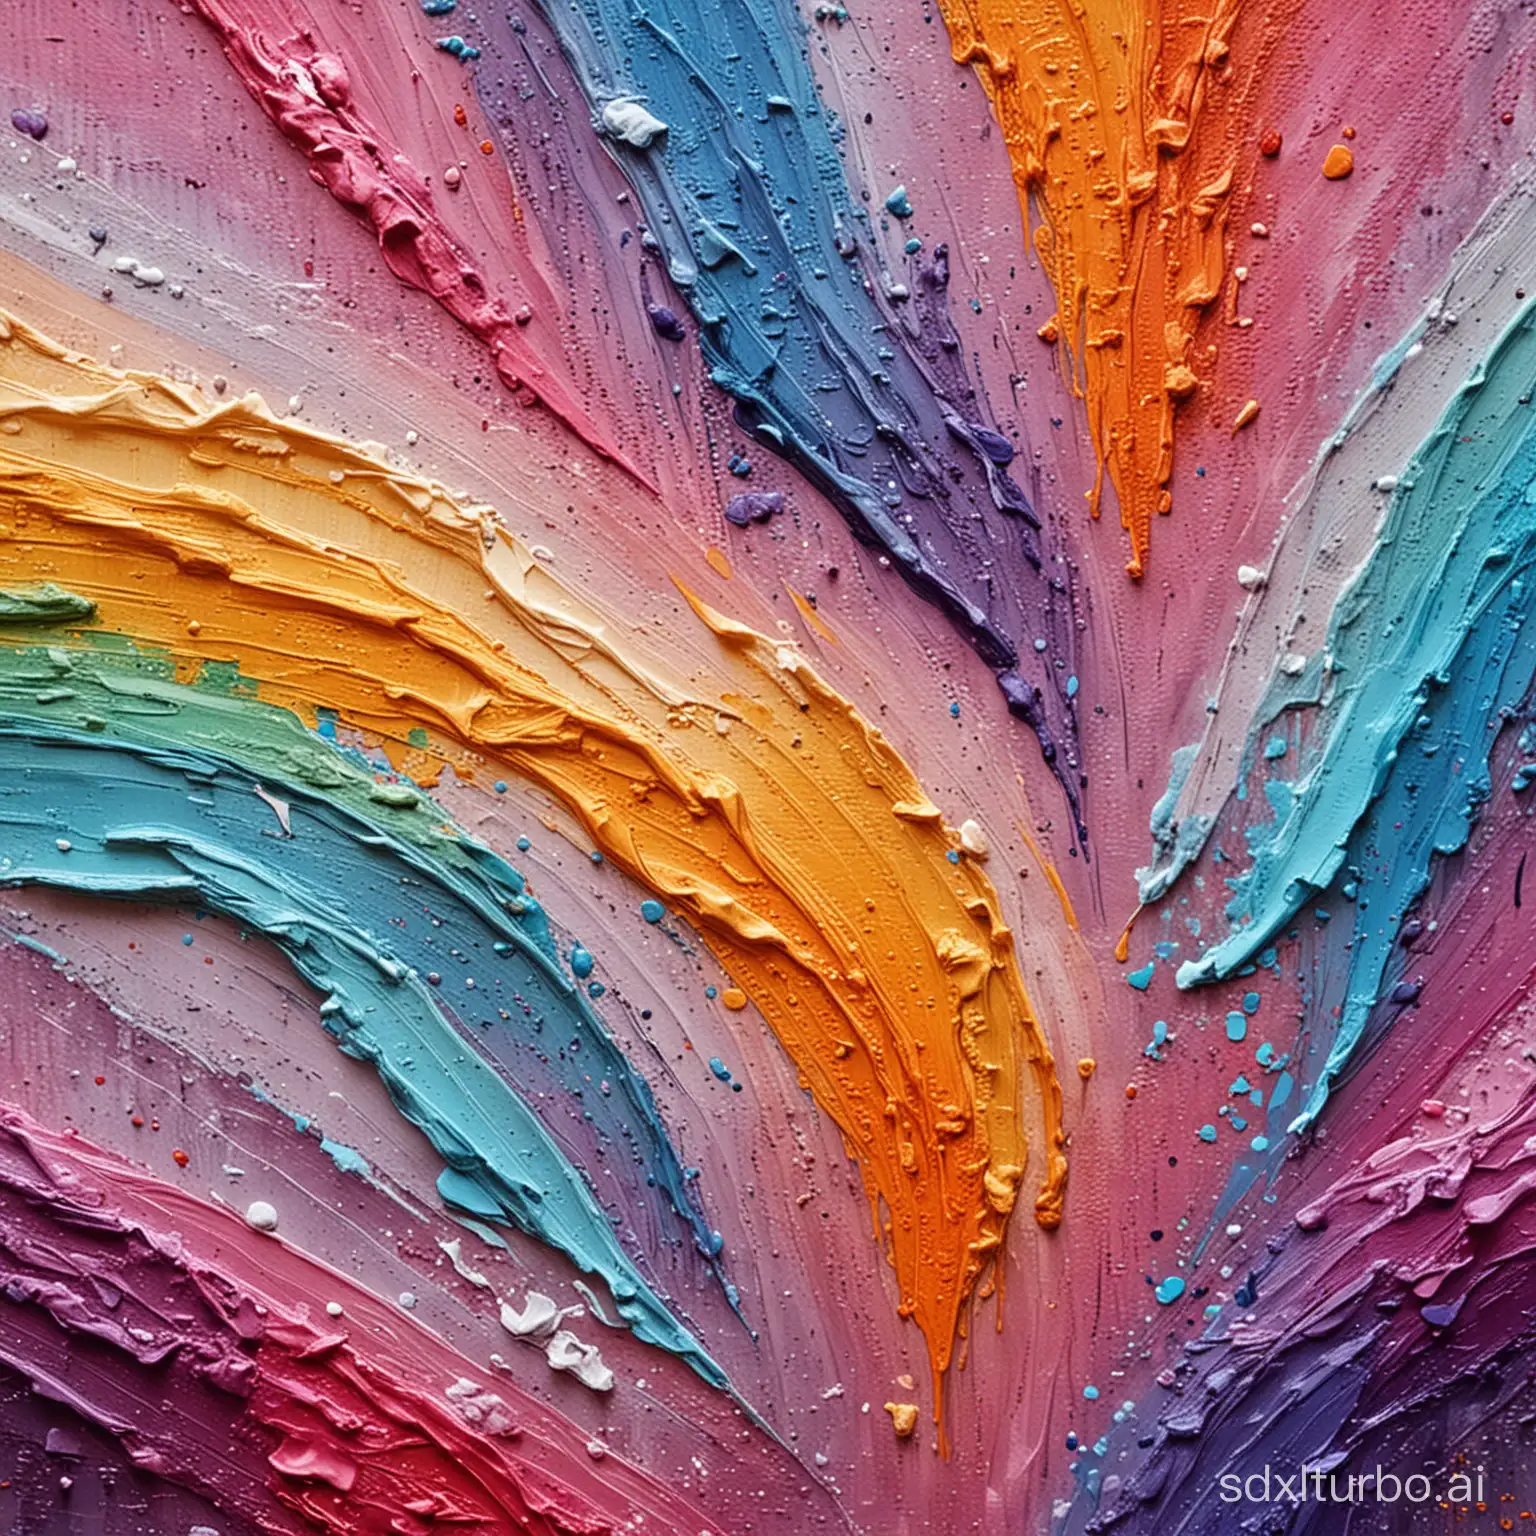 Vibrant-Textured-Oil-Painting-CloseUp-of-Colorful-Artwork